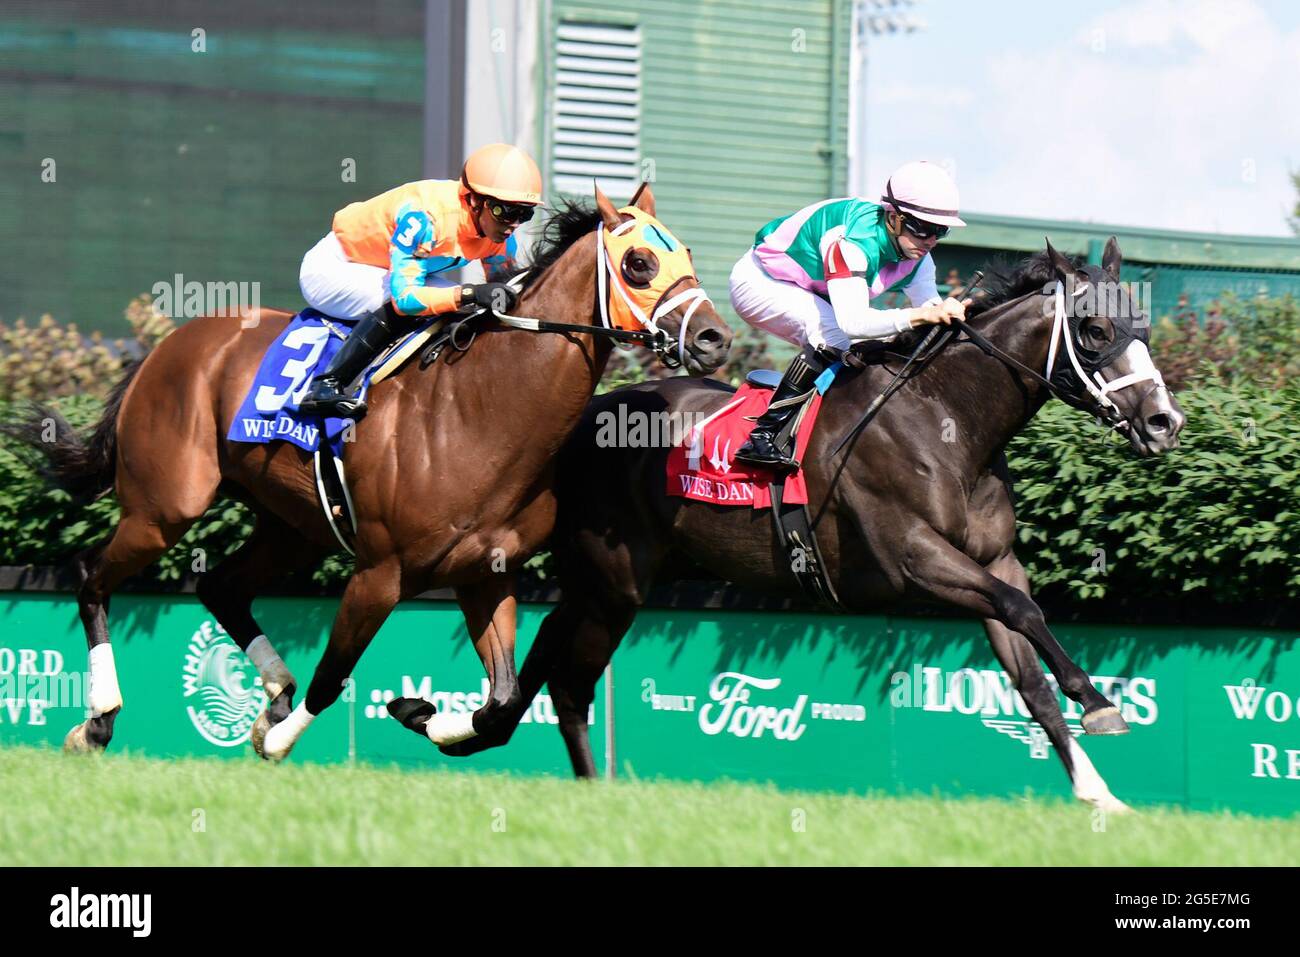 Louisville, Kentucky, USA. 26th June, 2021. June 26, 2021: Set Piece (GB) #1, ridden by jockey Florent Geroux, wins the Wise Dan Stakes (Grade 2) on the turf at Churchill Downs on June 26, 2021 in Louisville, Kentucky. Jessica MorganEclipse SportswireCSM/Alamy Live News Stock Photo